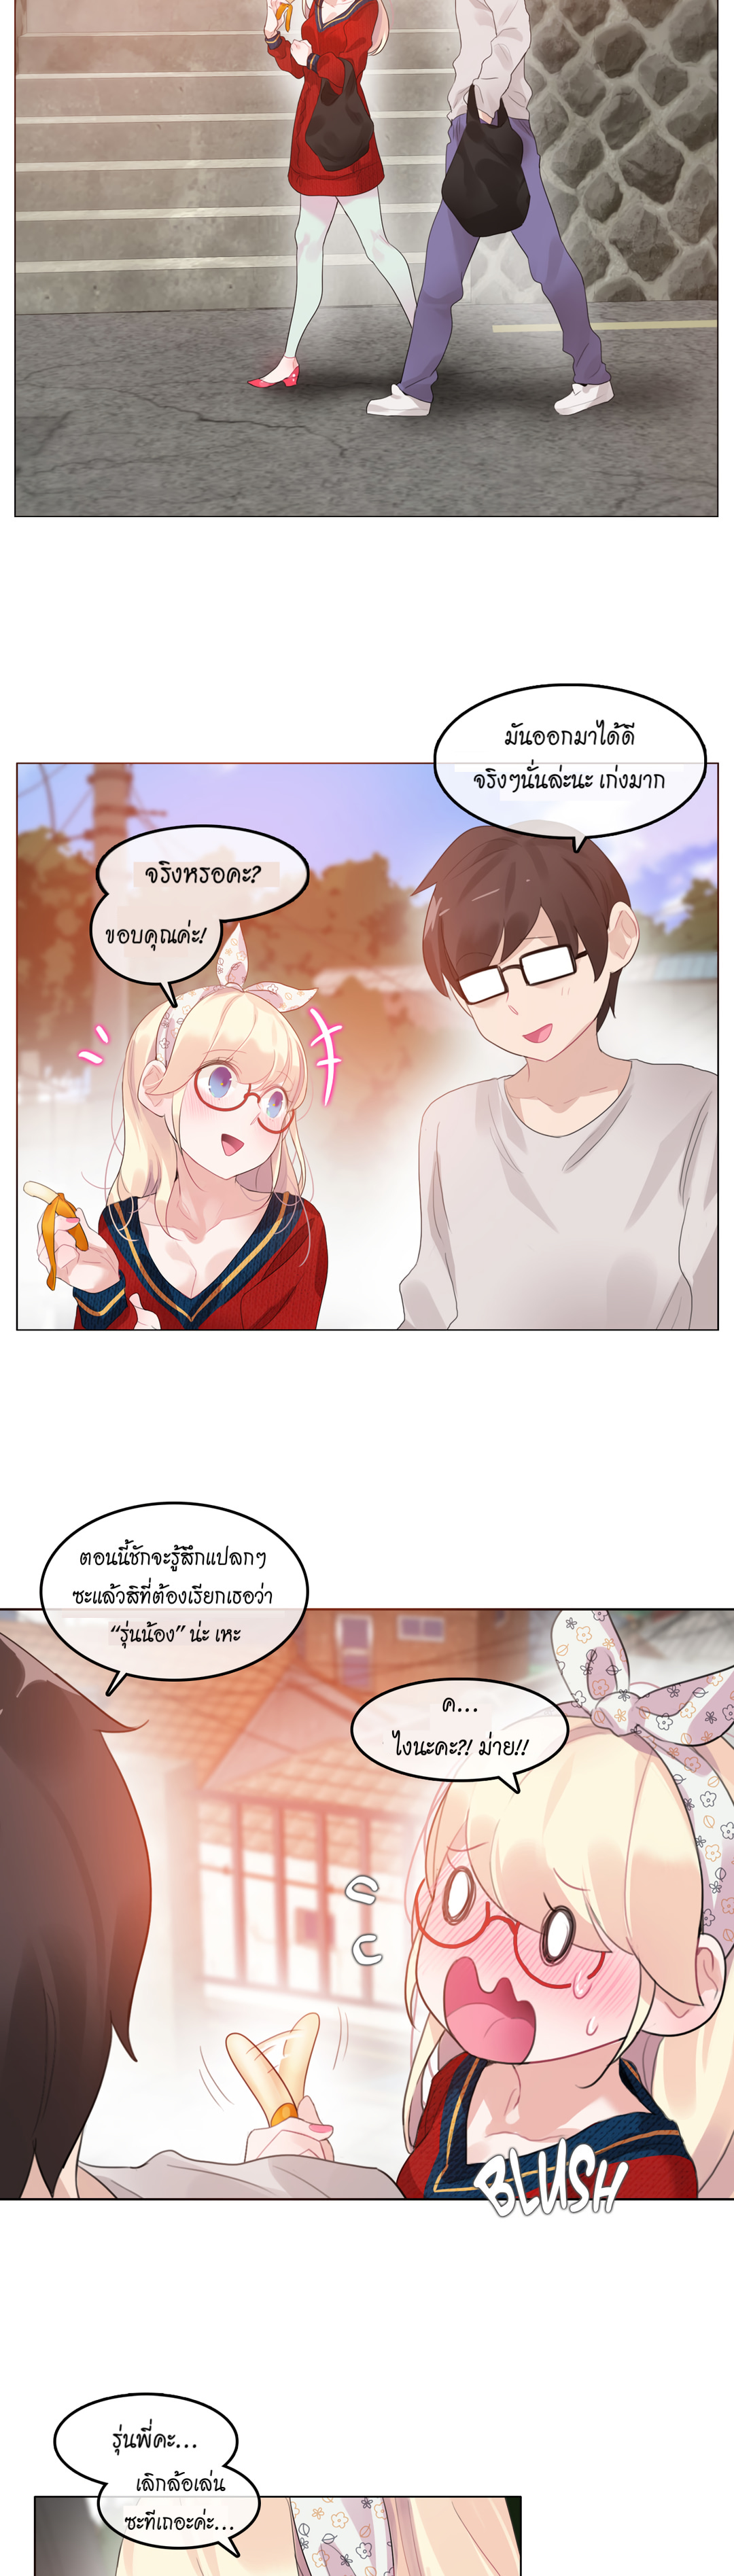 A Pervert’s Daily Life54 (16)